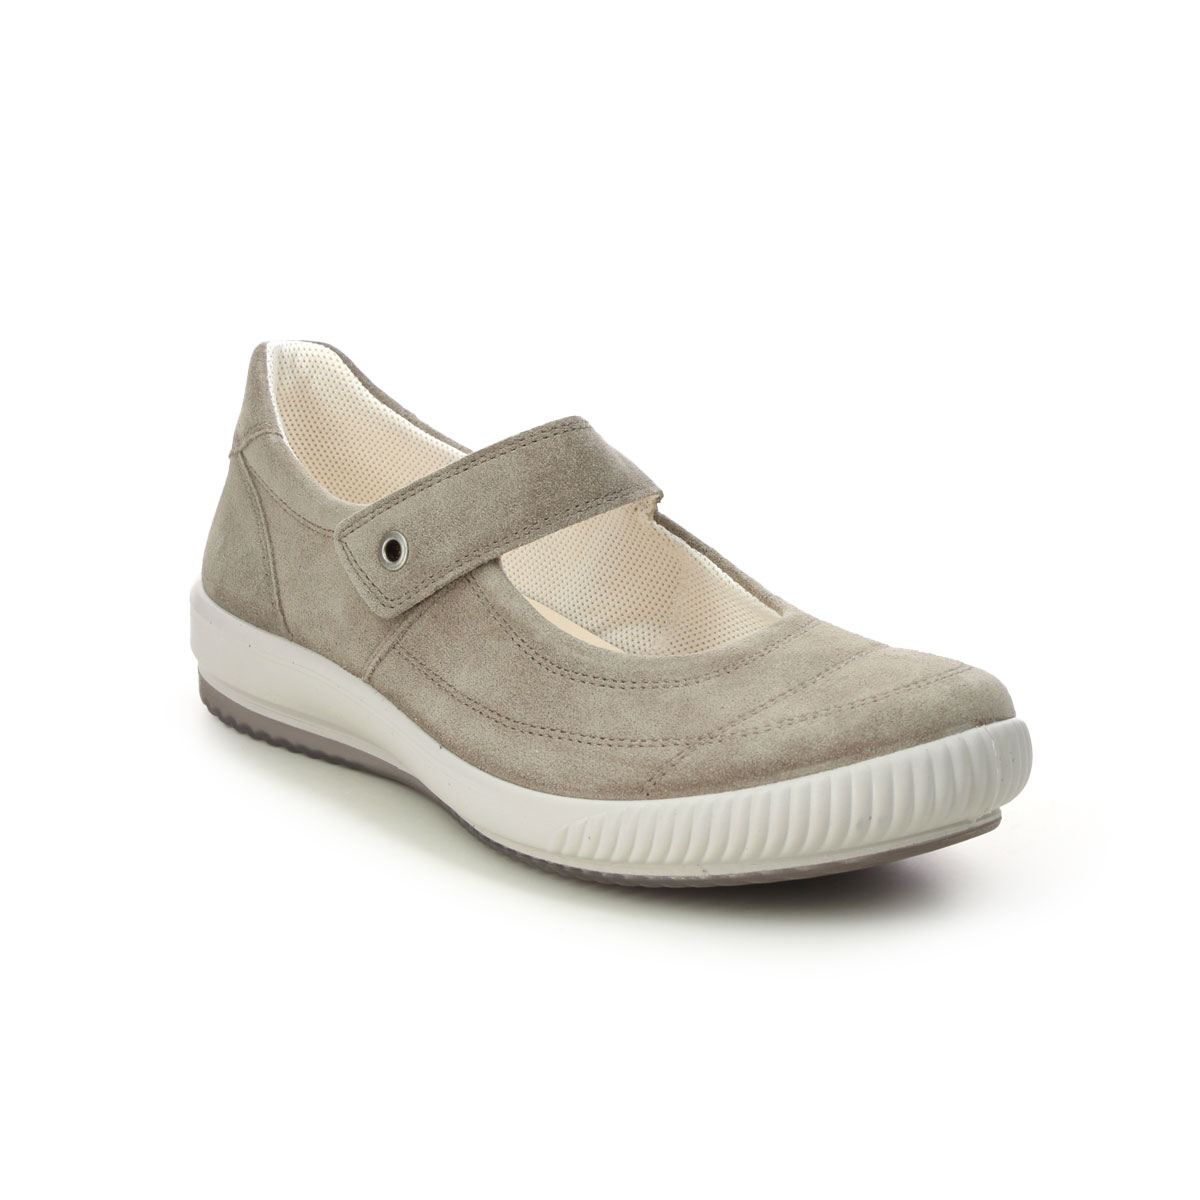 Legero Tanaro Bar Beige suede Womens Mary Jane Shoes 2000300-4500 in a Plain Leather in Size 6.5